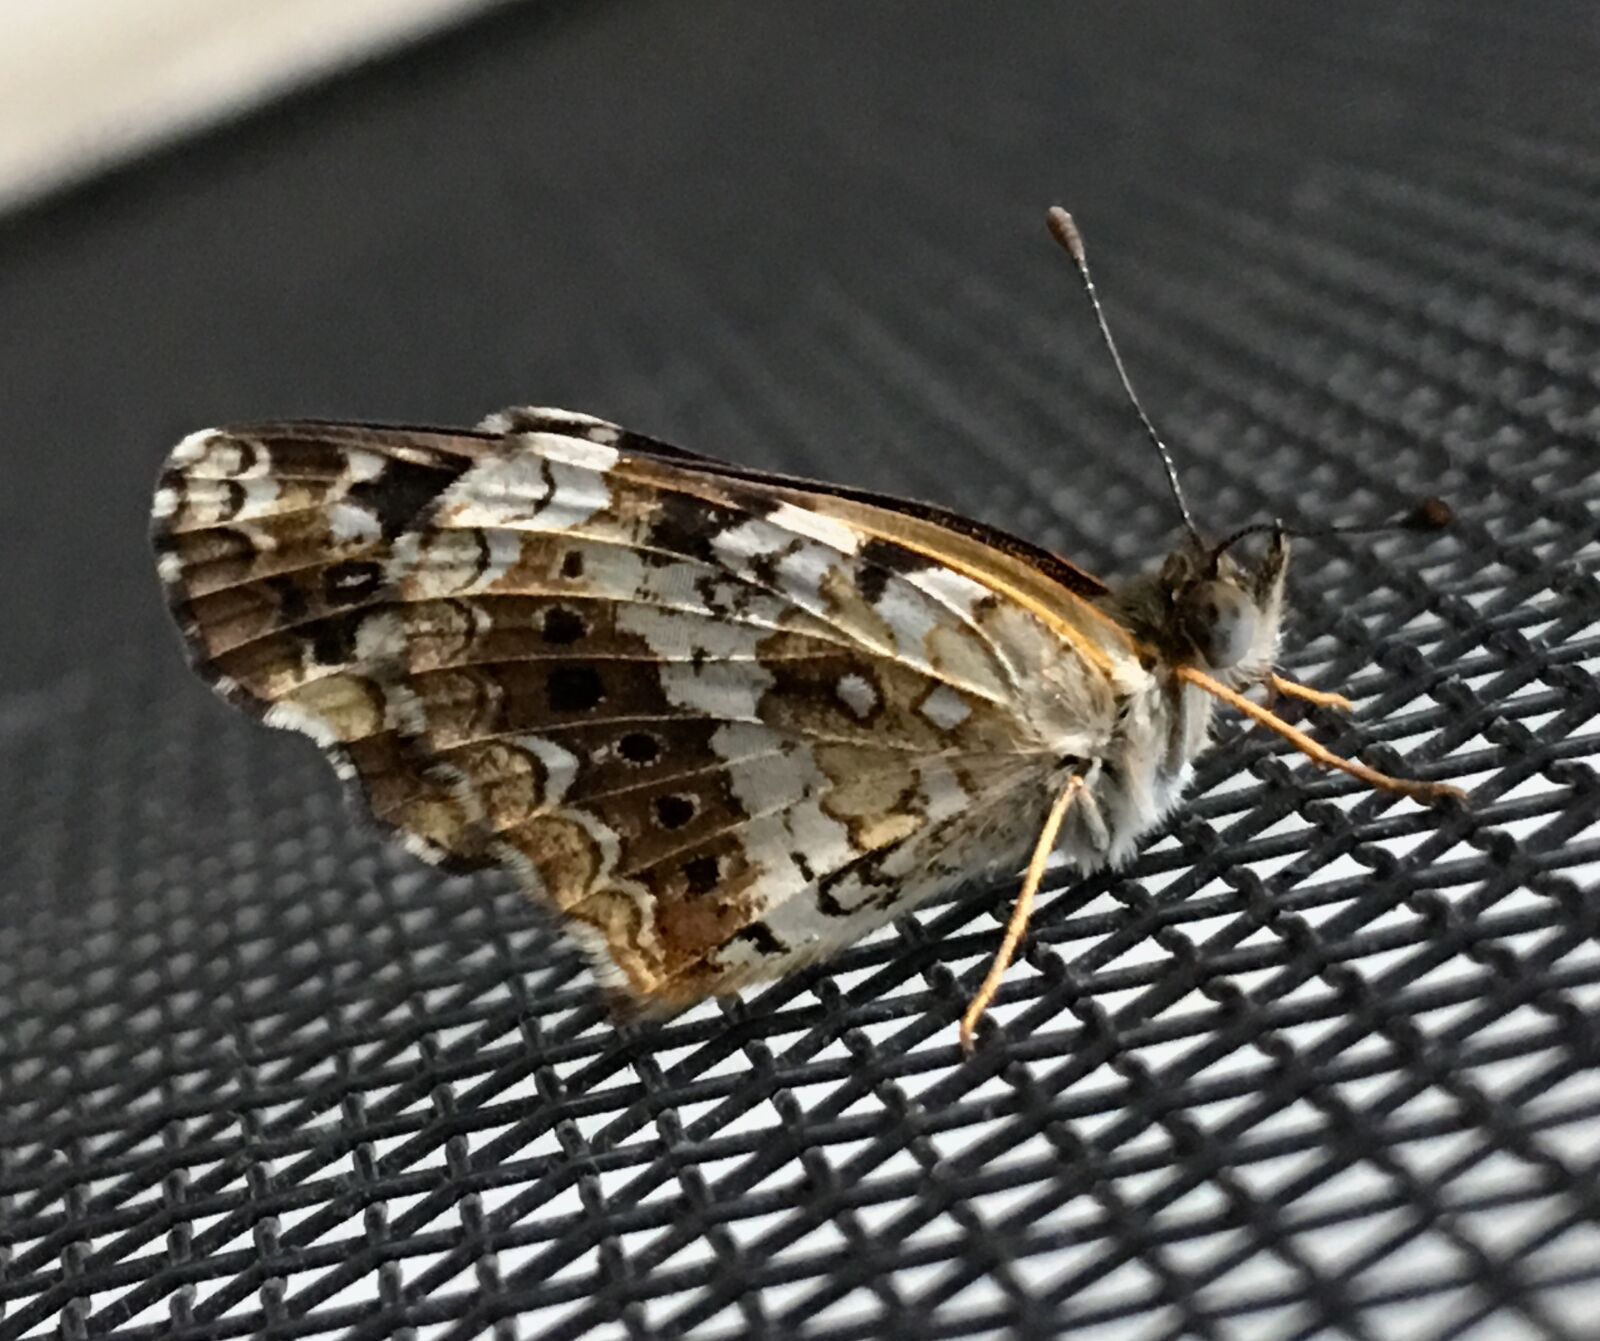 Apple iPhone 6s Plus sample photo. Small butterfly, antenna, tiny photography